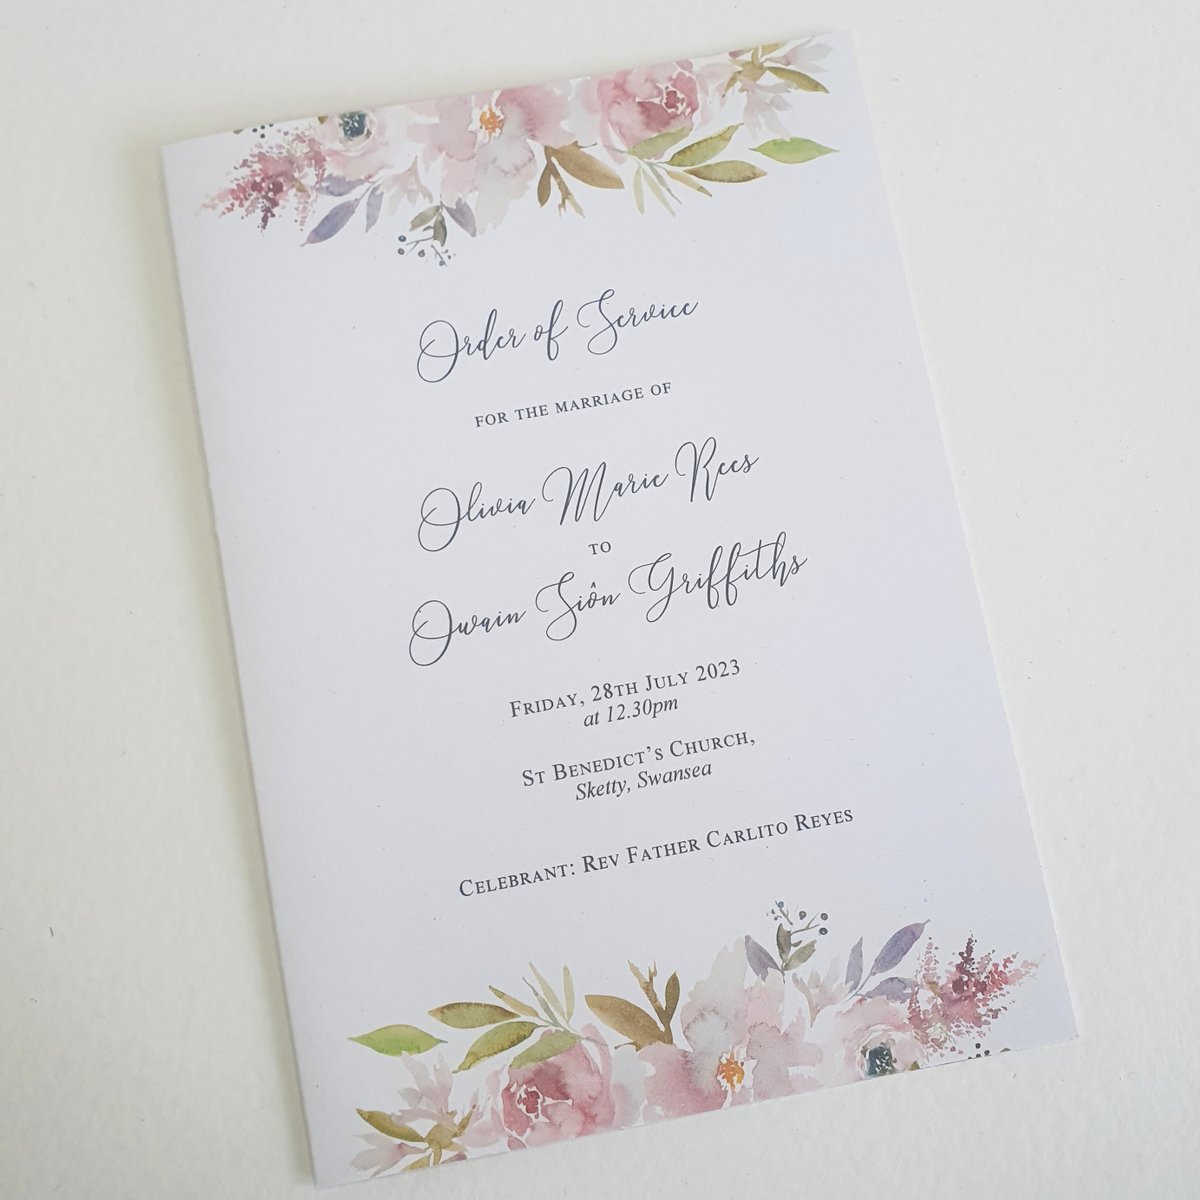 the front cover of a wedding order of service card with mauve floral printed design